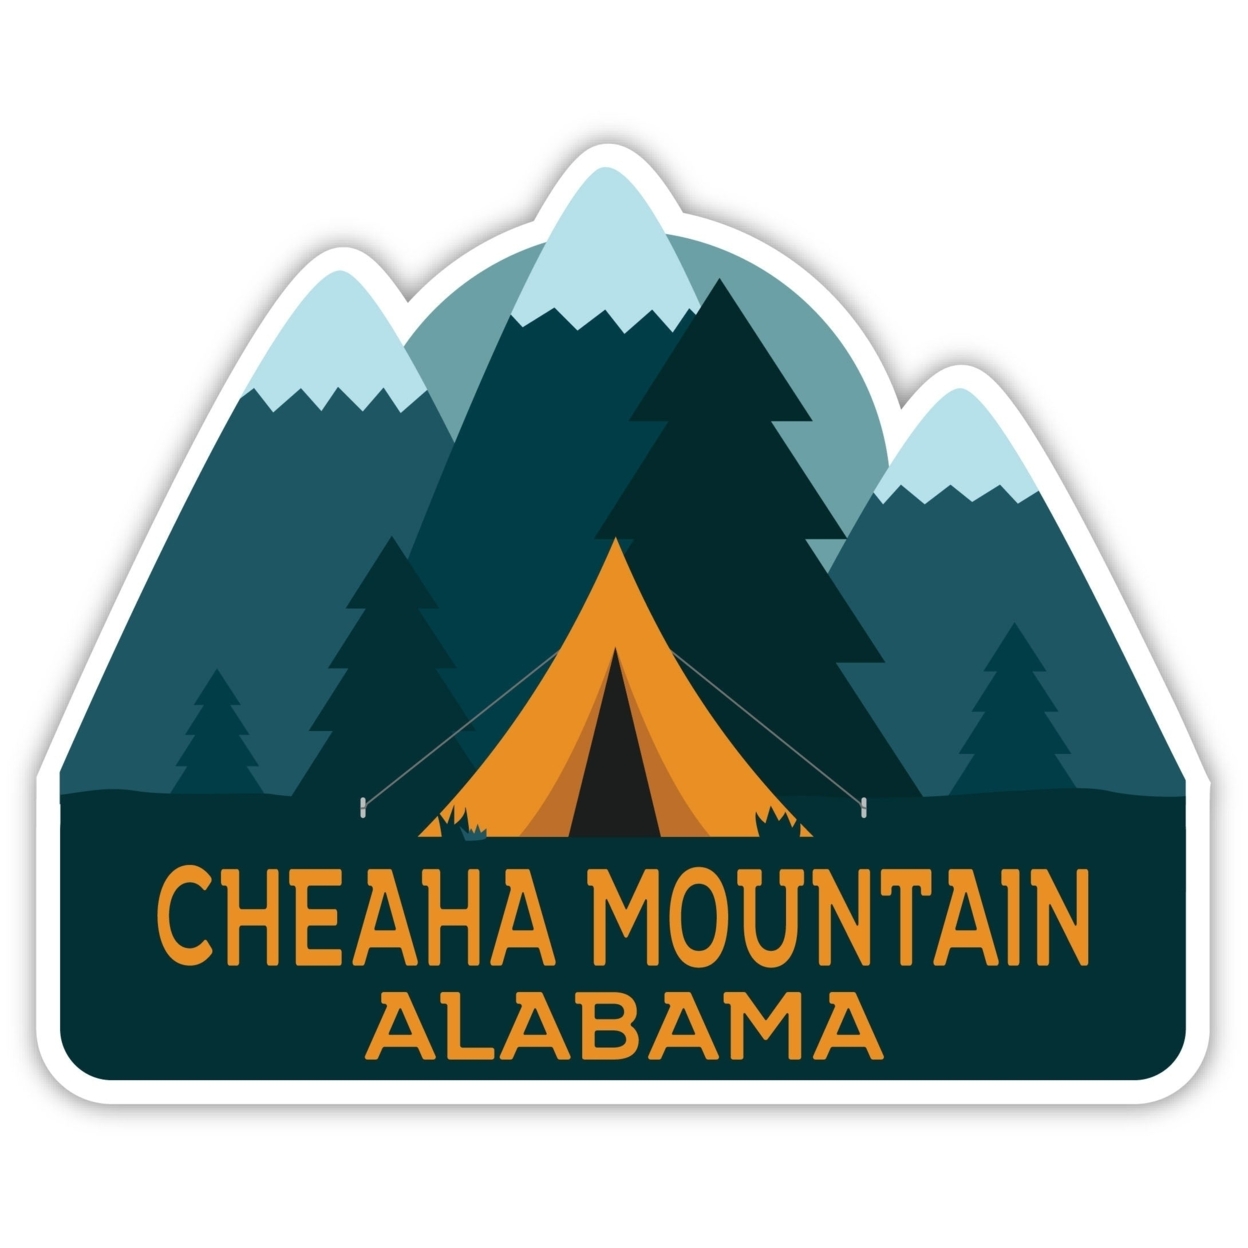 Cheaha Mountain Alabama Souvenir Decorative Stickers (Choose Theme And Size) - 4-Pack, 10-Inch, Tent